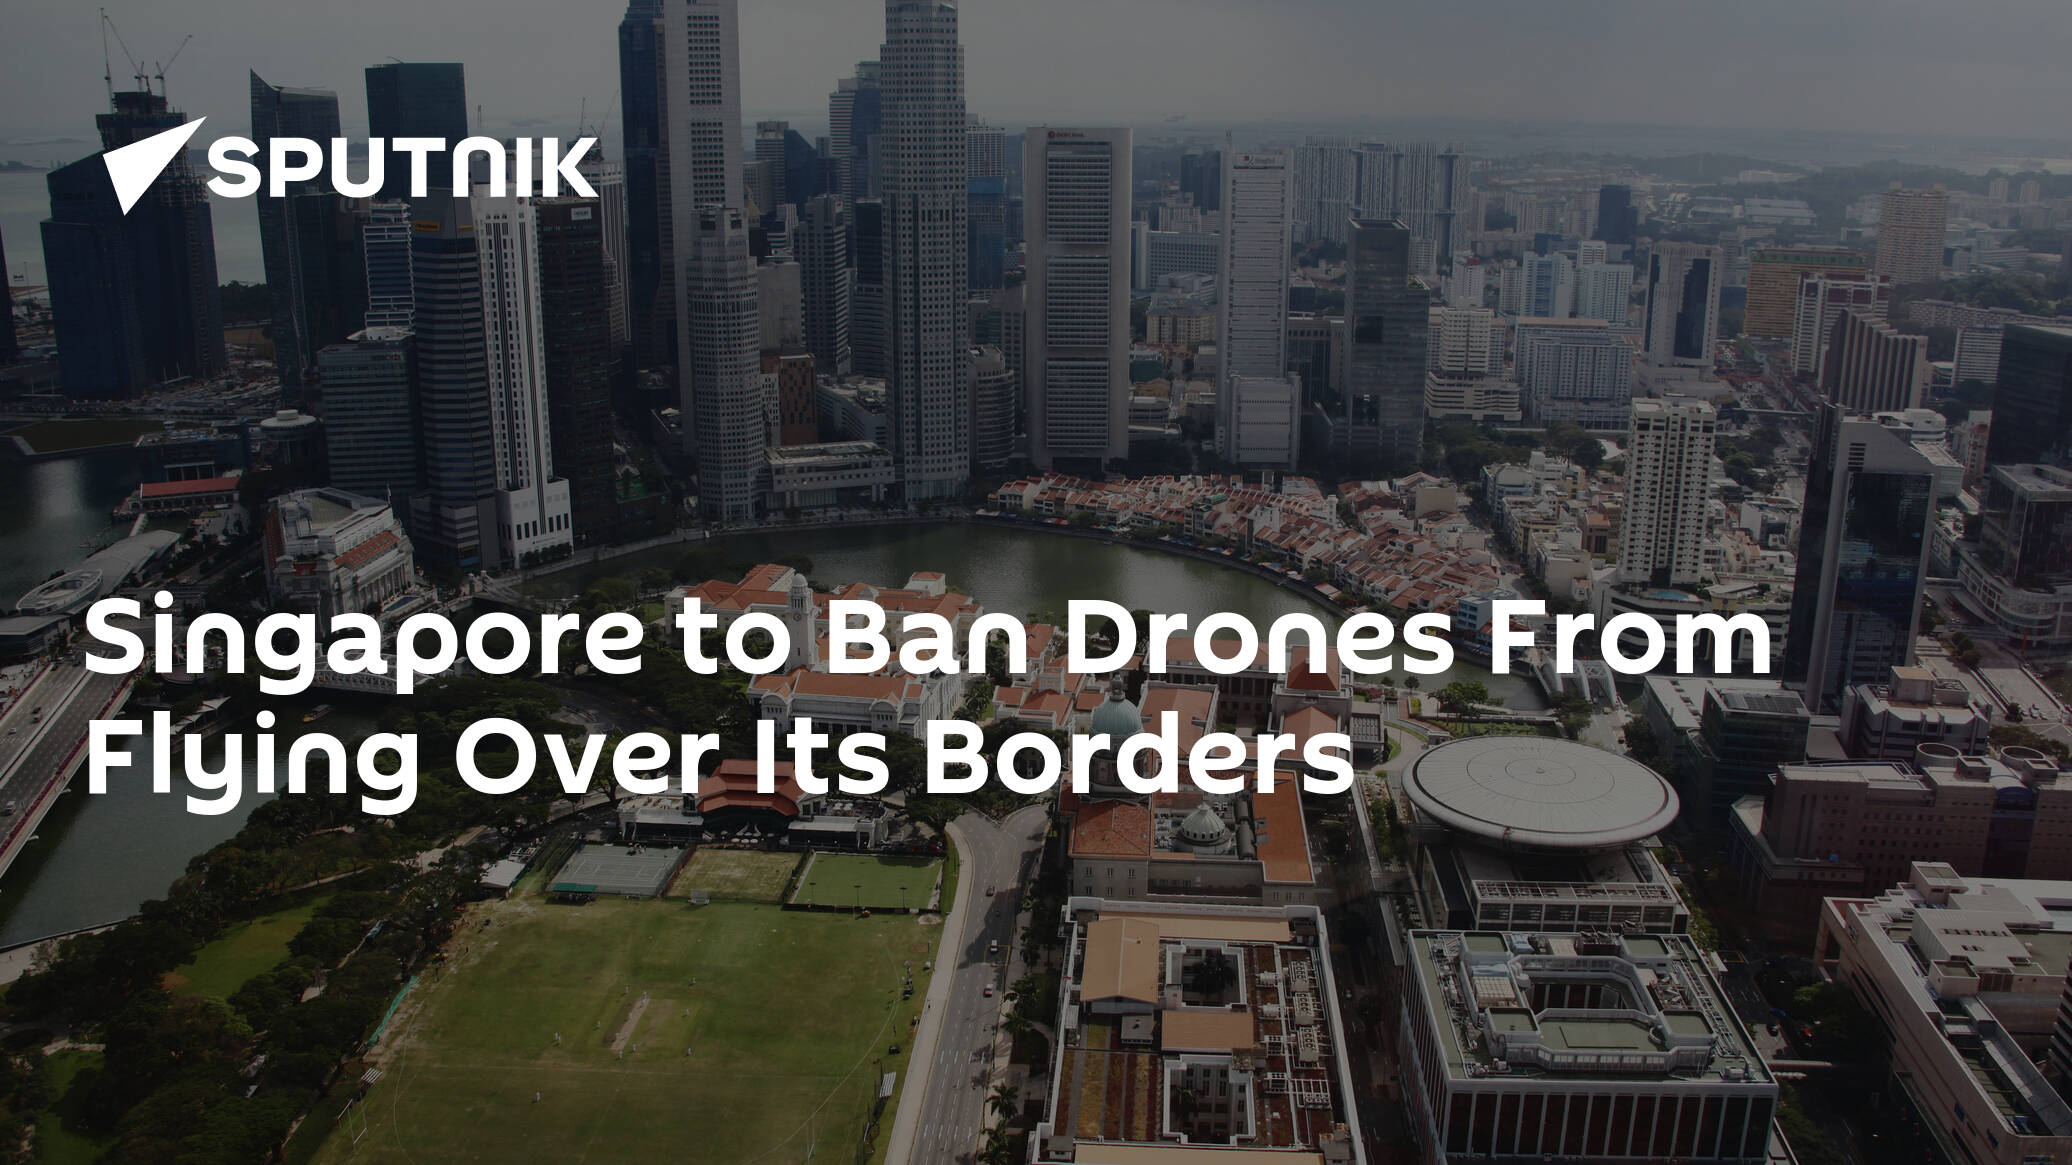 Singapore to Ban Drones From Flying Over Its Borders